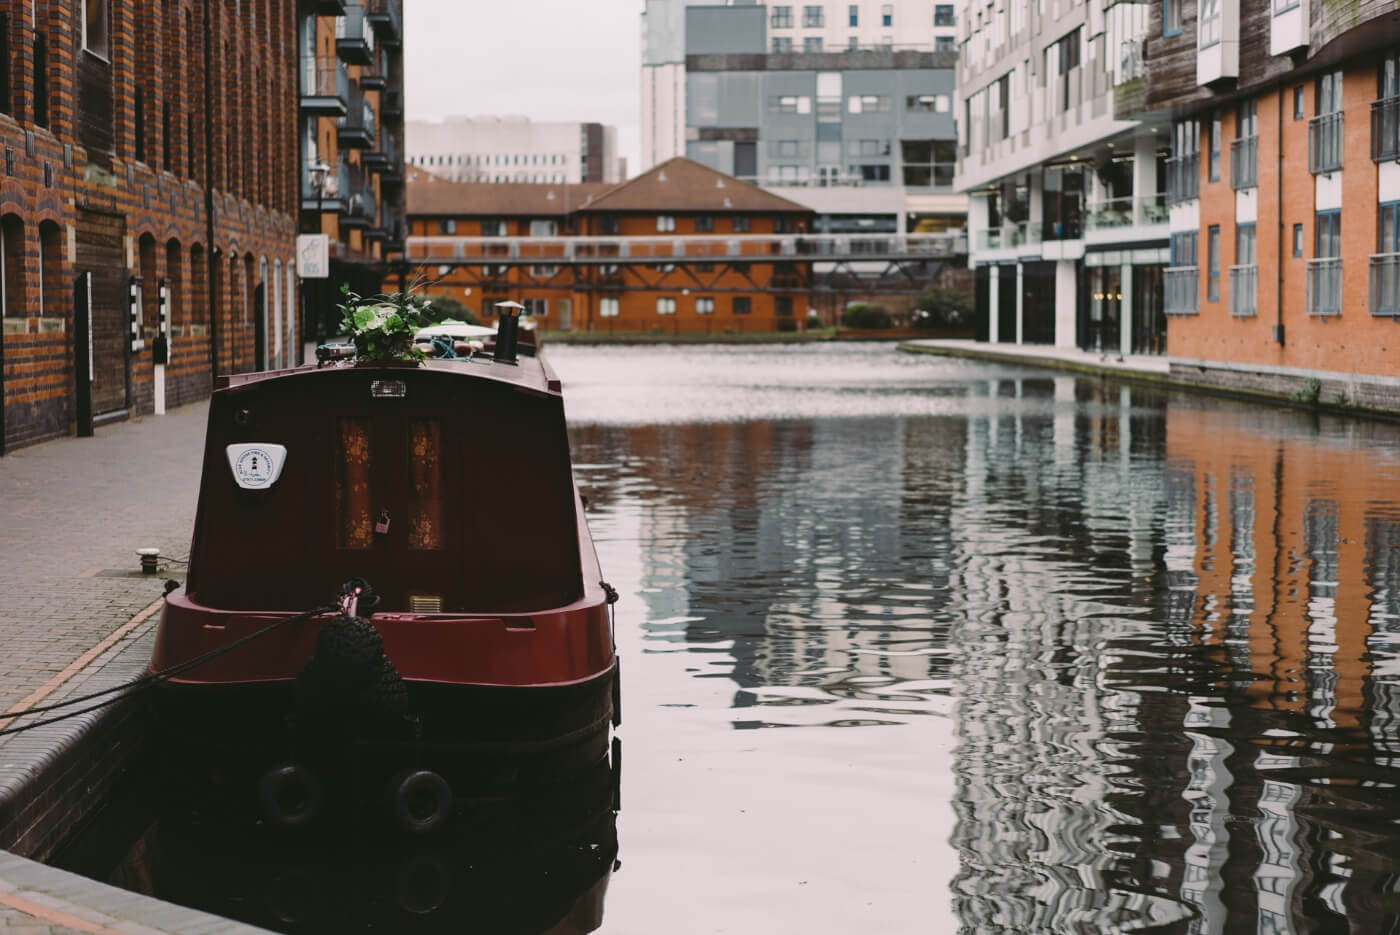 Student Accommodation in Edgbaston, Birmingham - river boat on the canal